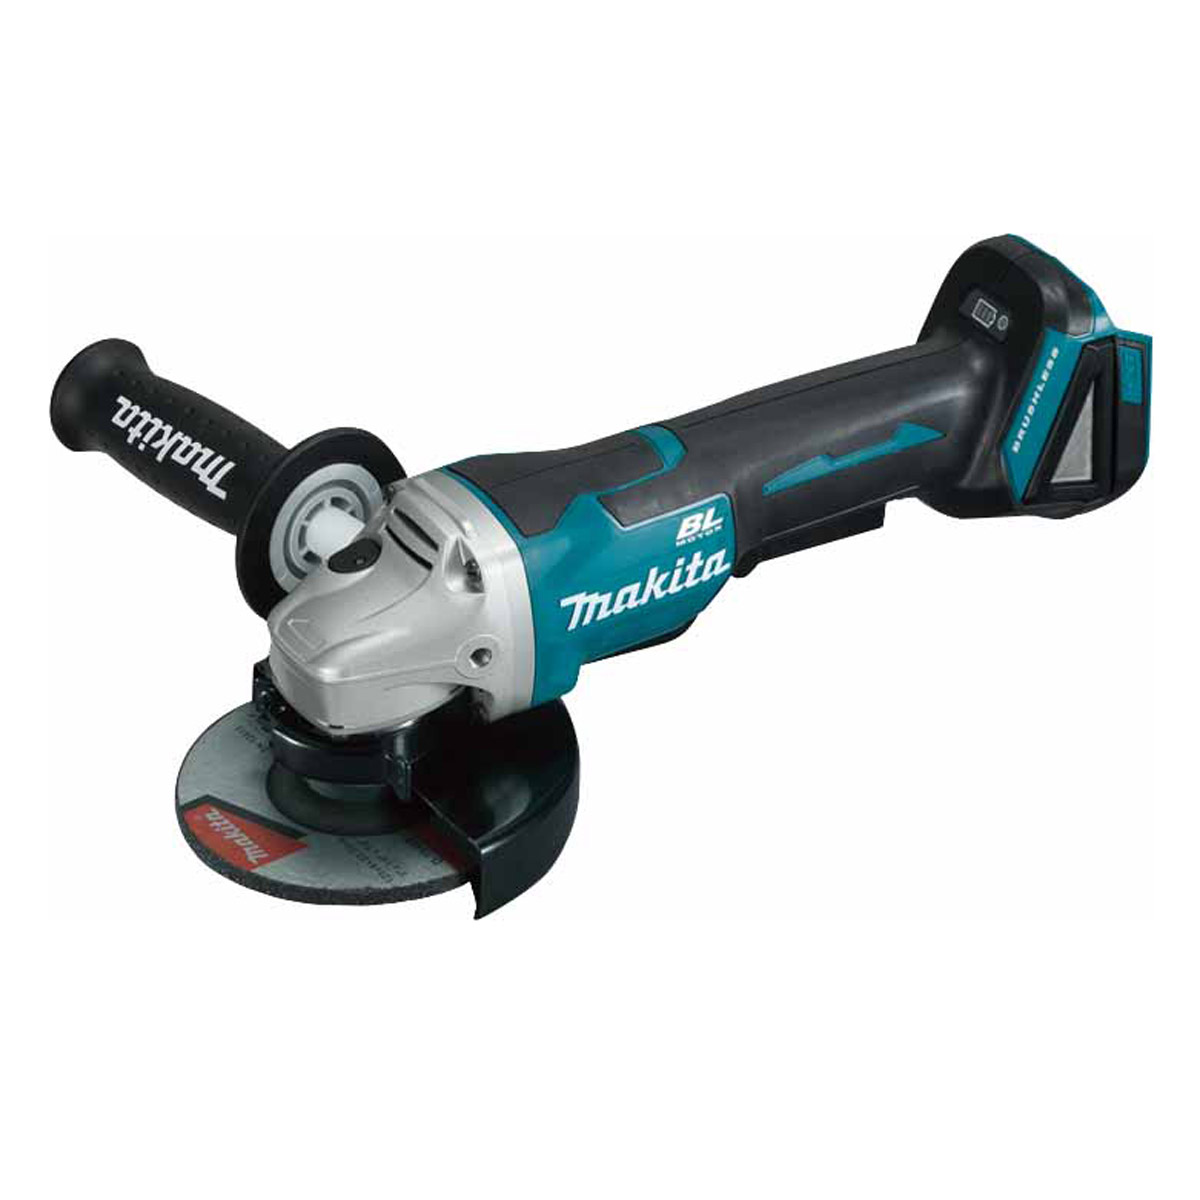 18V LXT 5" Cordless Angle Grinder with XPT, Brushless Motor & Battery Fuel Gauge (Tool Only)